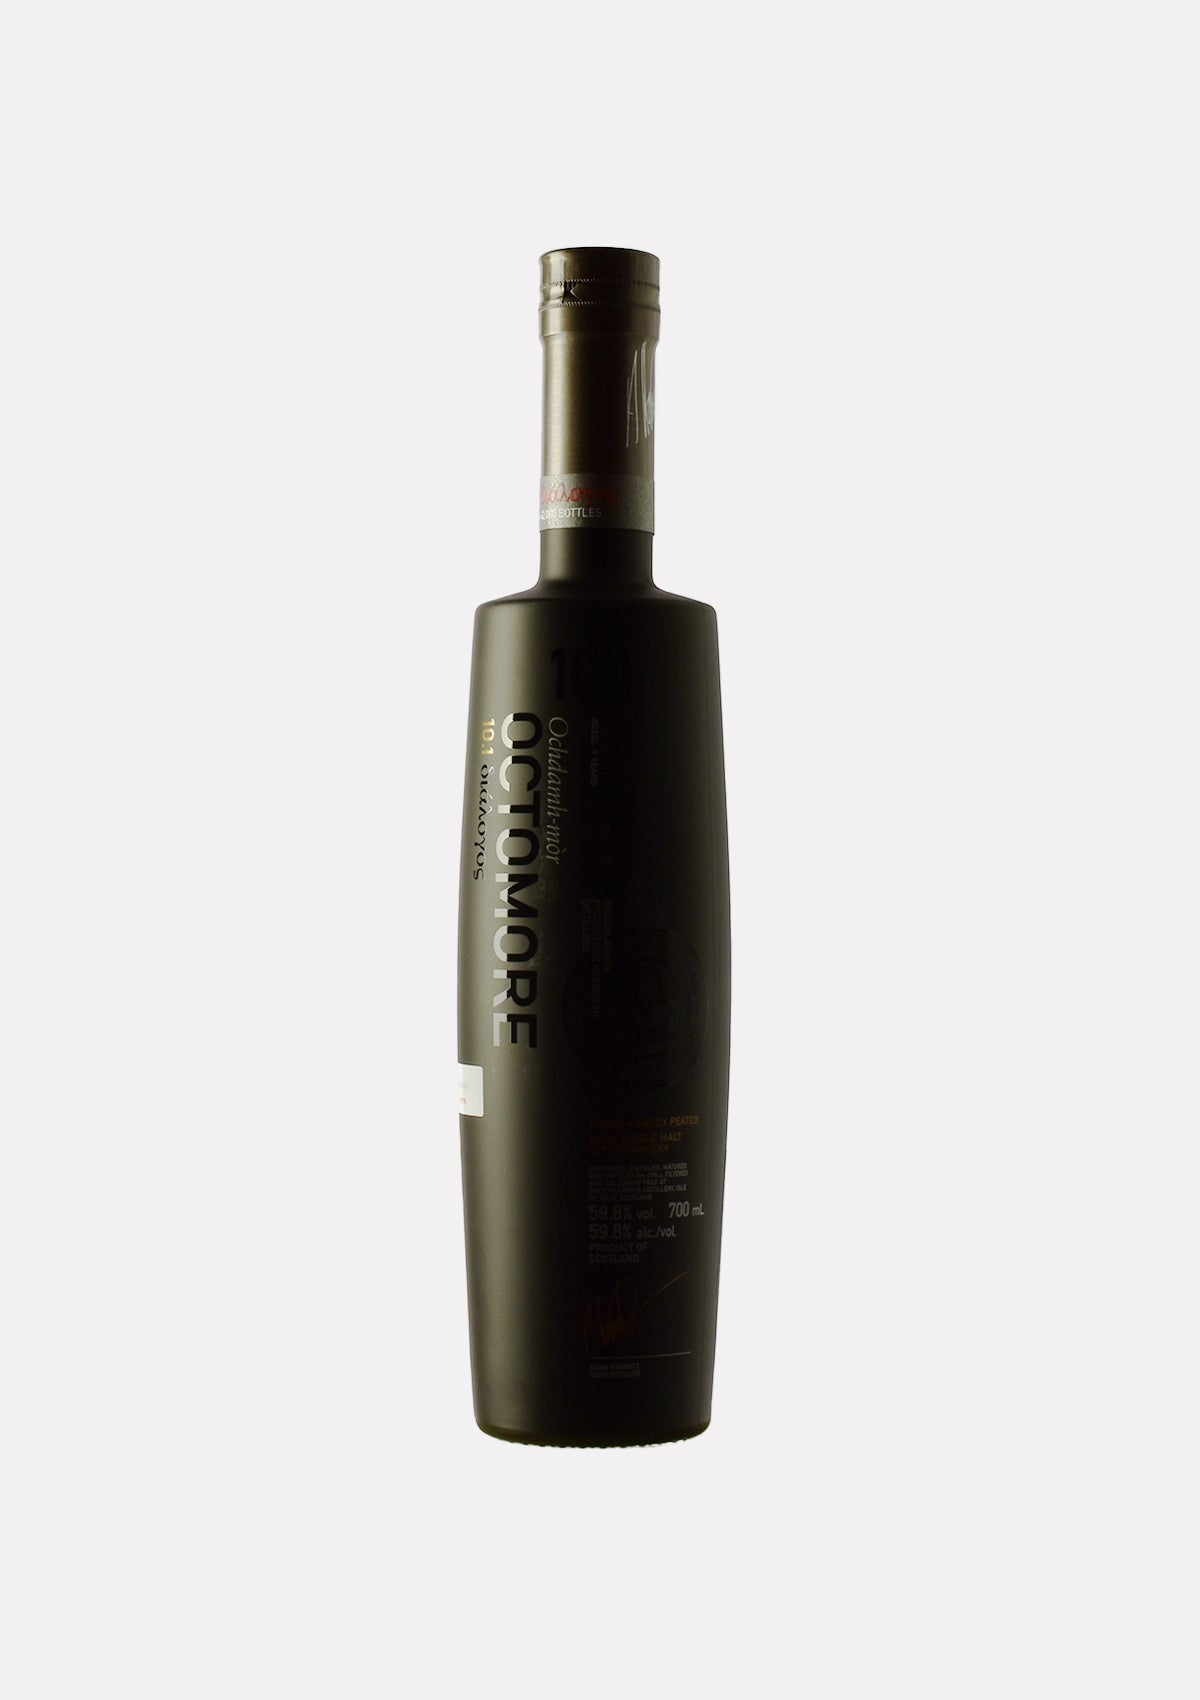 Octomore 10.1 107 ppm